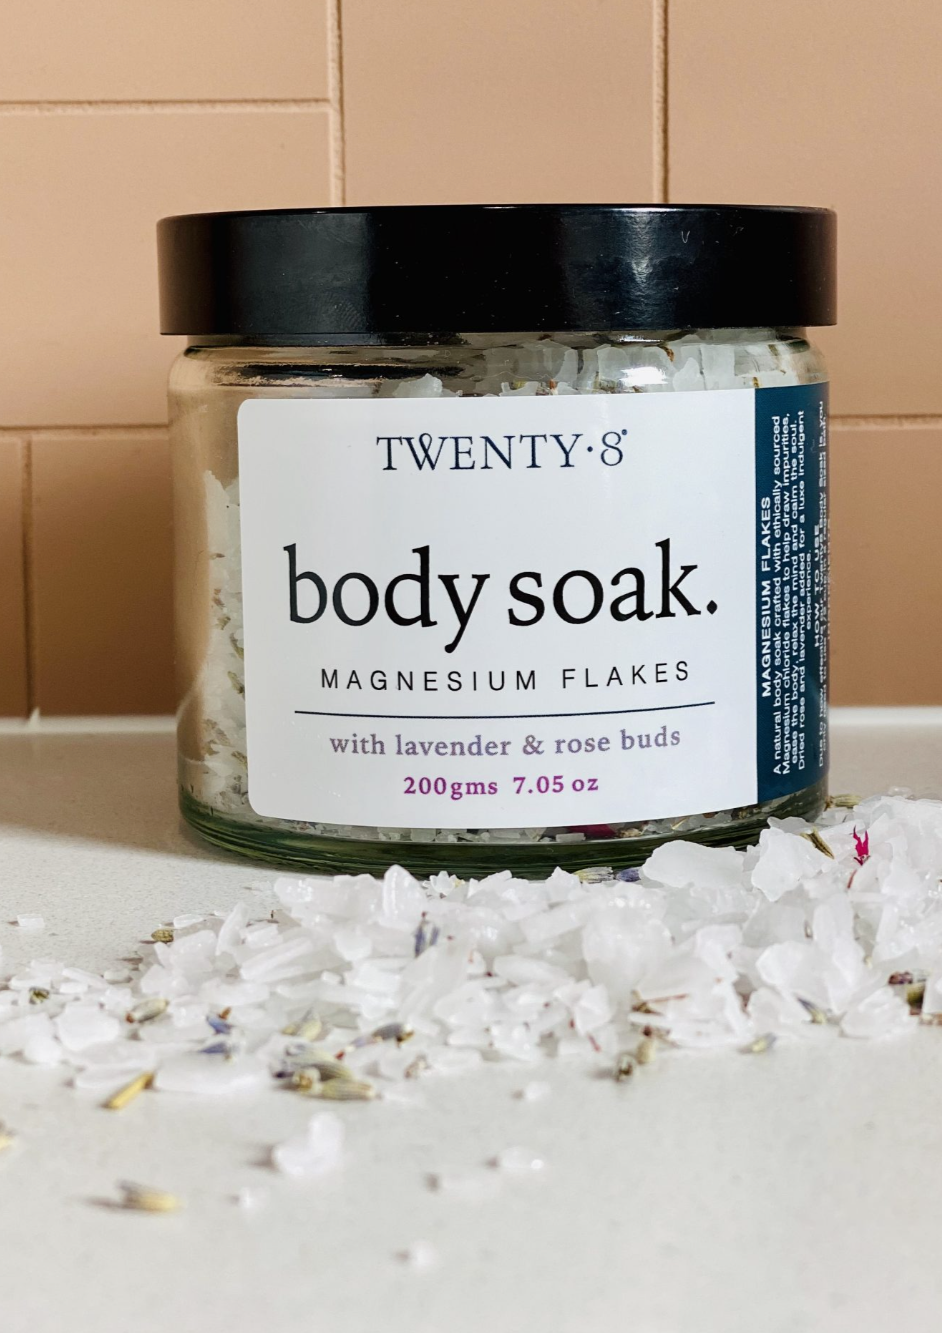 BODY SOAK – Magnesium Flakes with Rose buds and Lavender flowers  A natural body soak crafted with ethically sourced Magnesium chloride flakes to help draw impurities, ease the body, relax the mind and calm the soul.